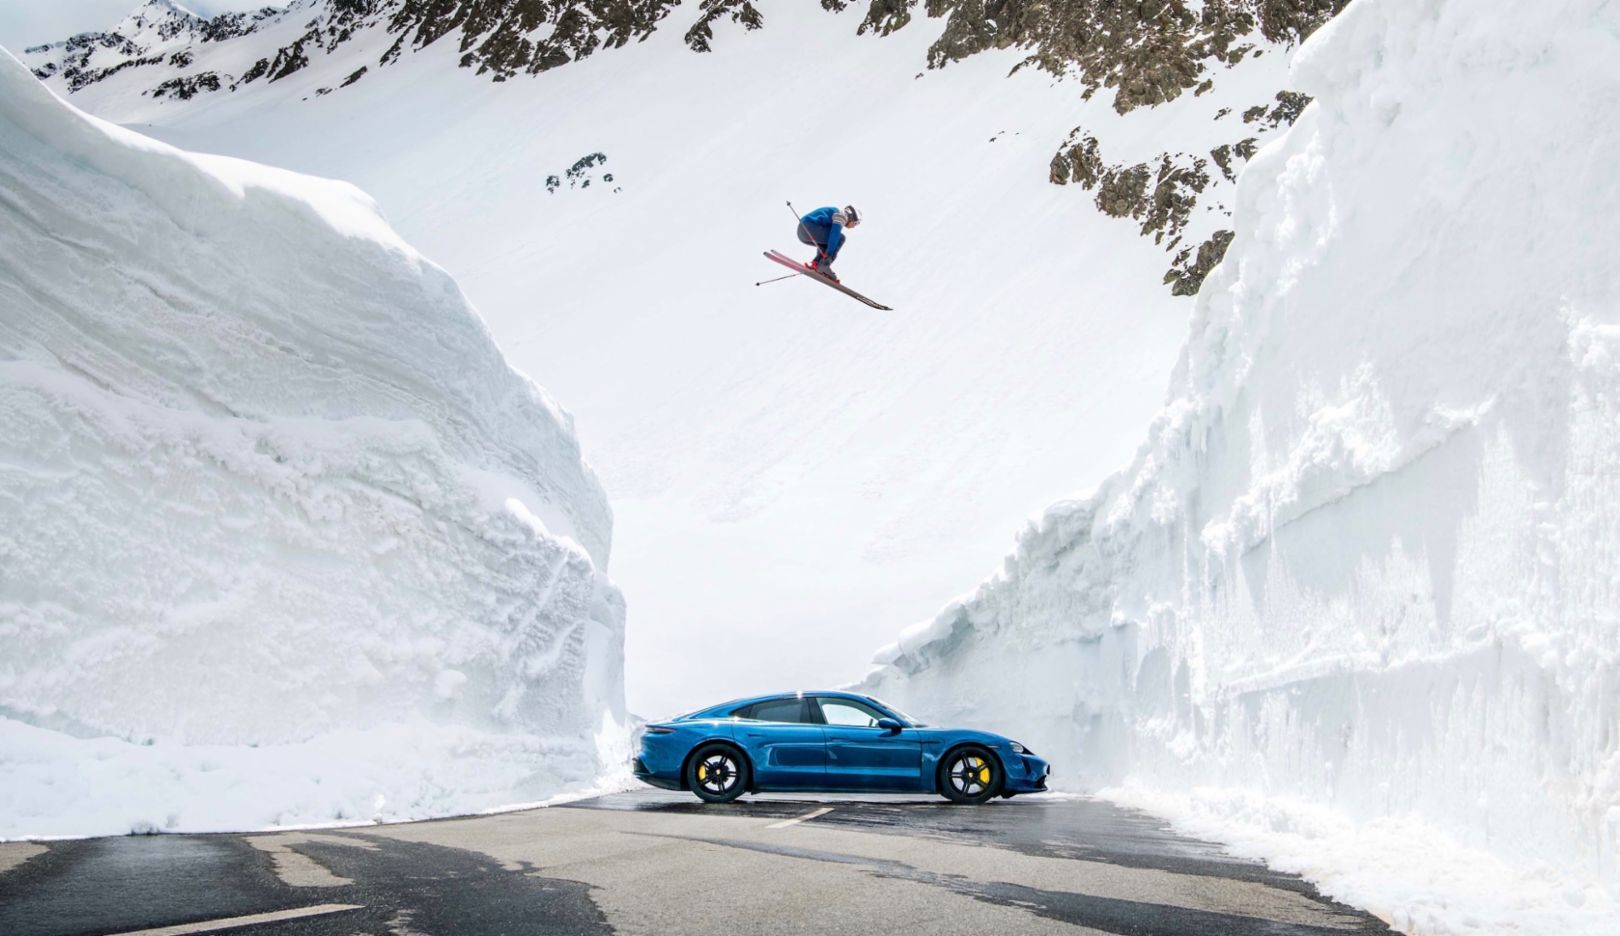 The Porsche Jump: the drive to keep pushing the boundaries